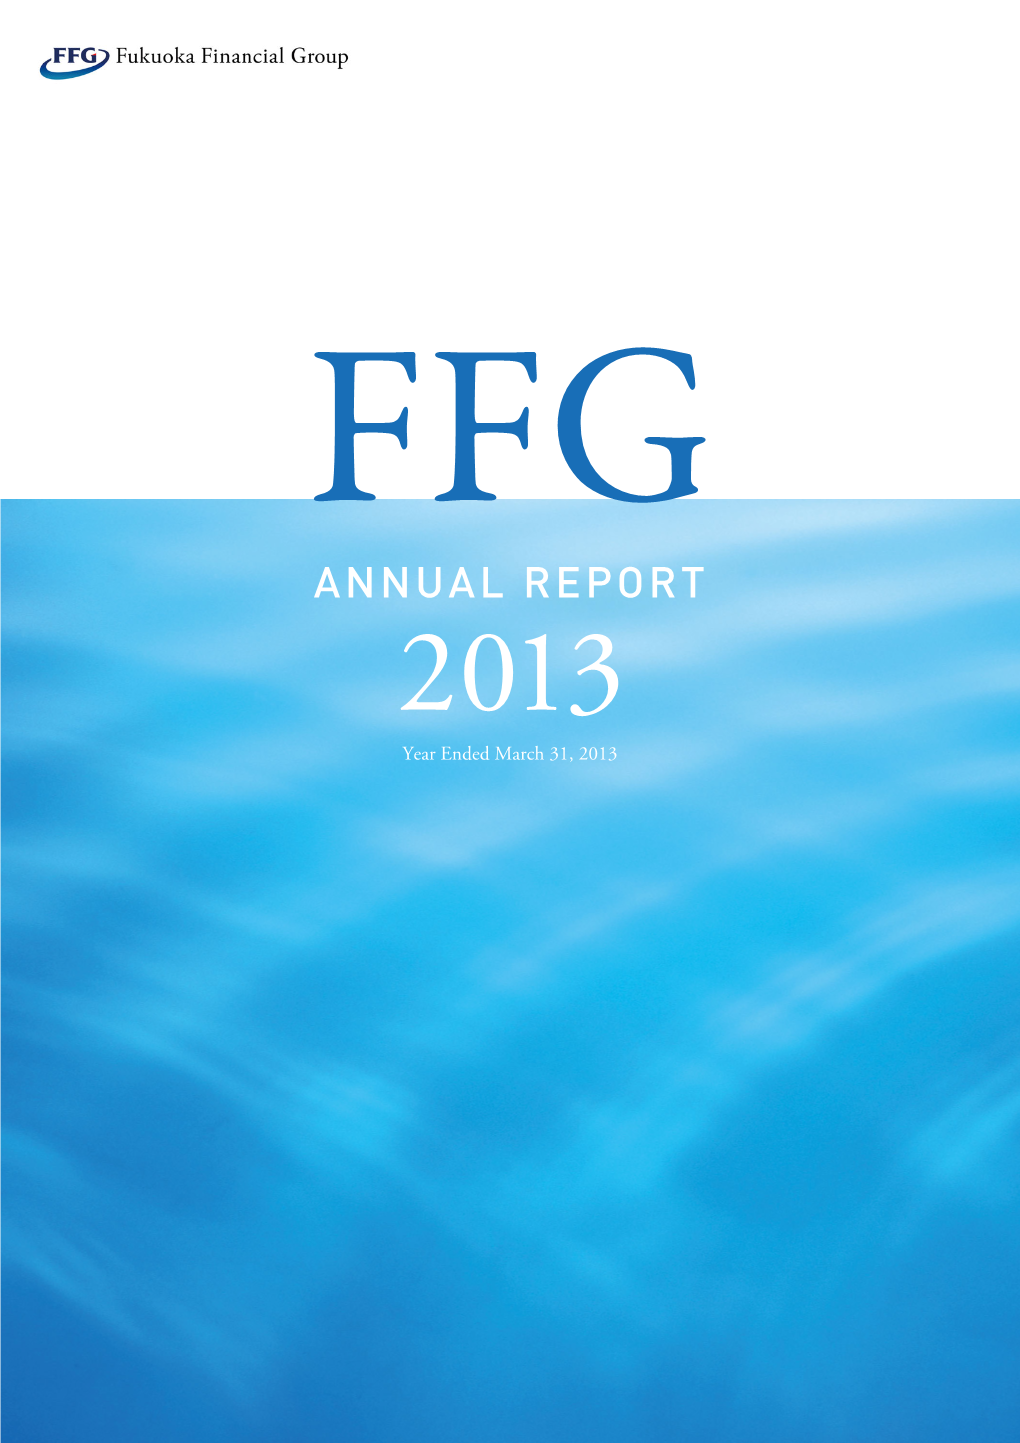 Annual Report 2013 Is a Summary of the Management Policies and General Business Conditions for FFG in Fiscal 2012, Ended March 31, 2013